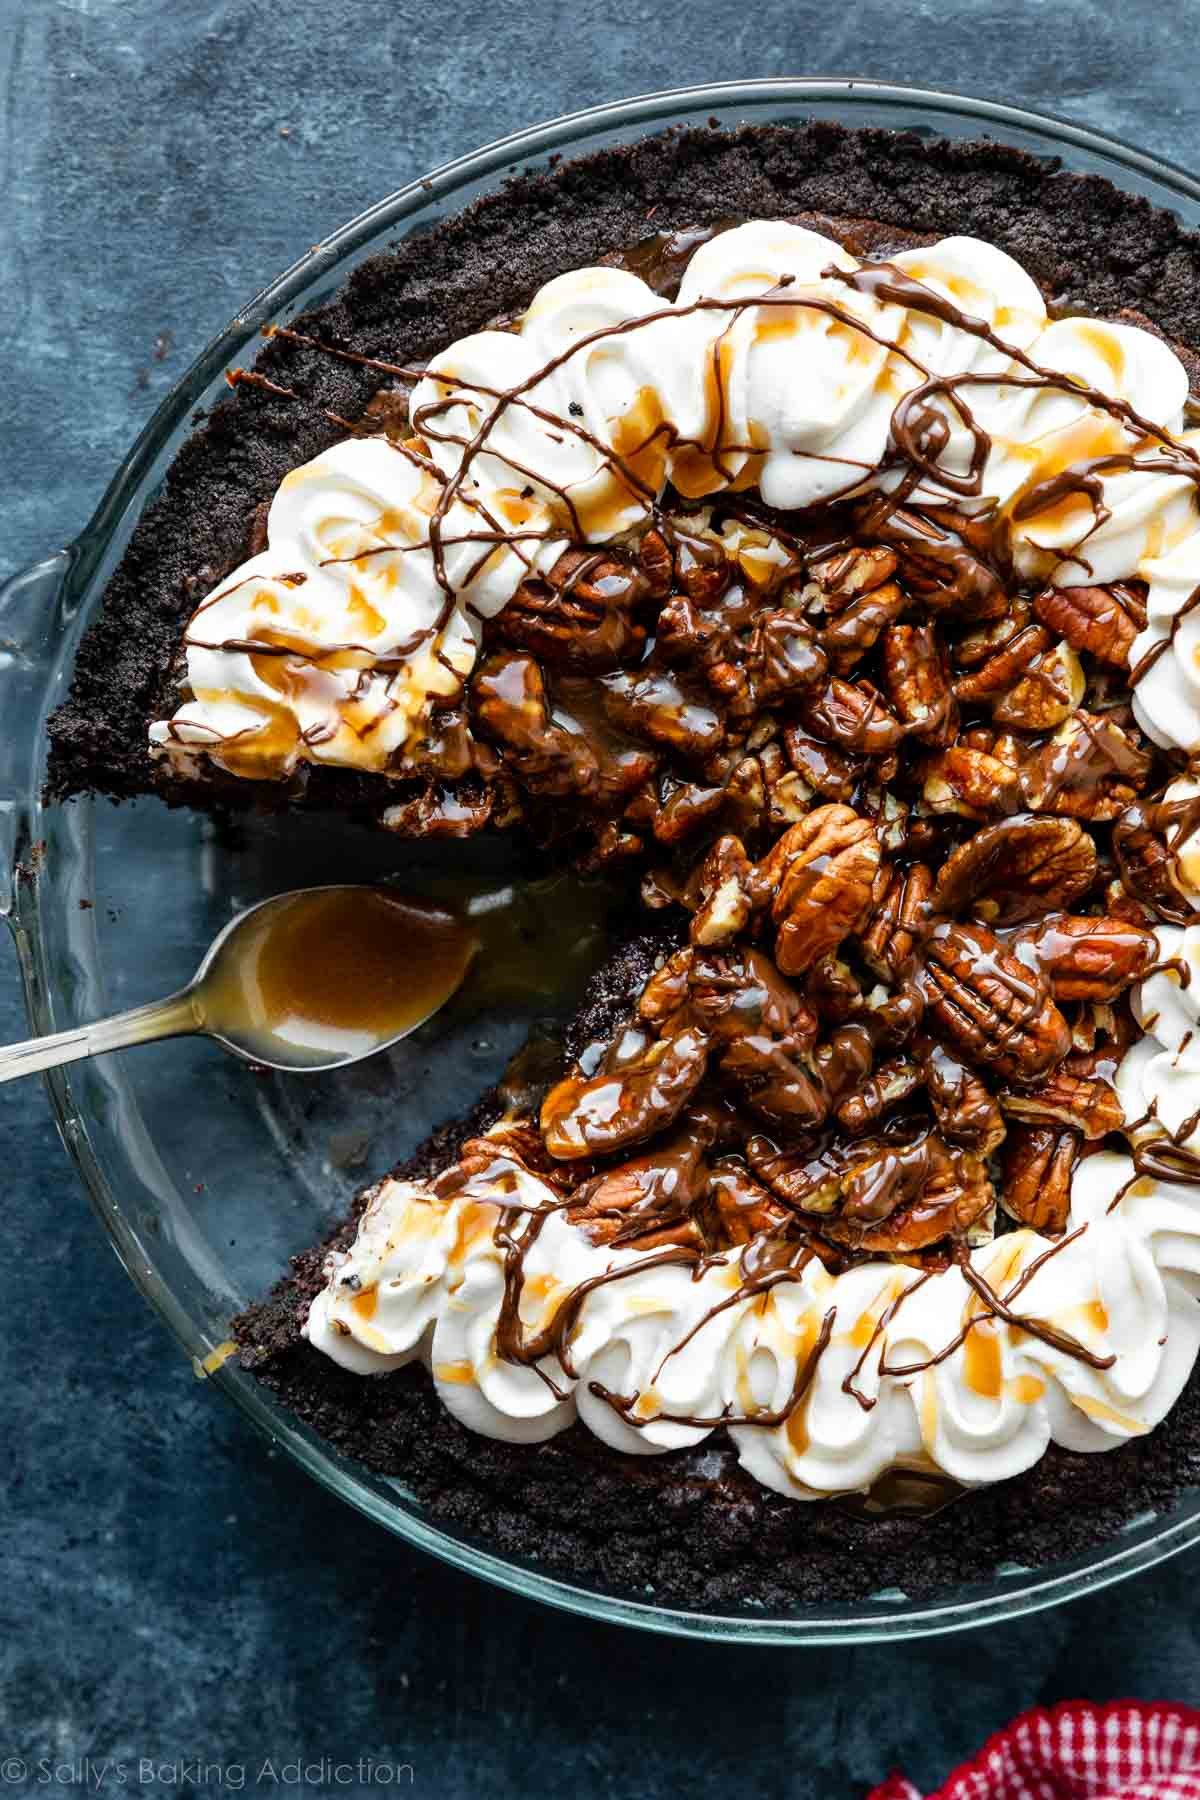 caramel turtle brownie pie topped with melted chocolate, pecans, caramel sauce, and piped whipped cream with slice taken out.